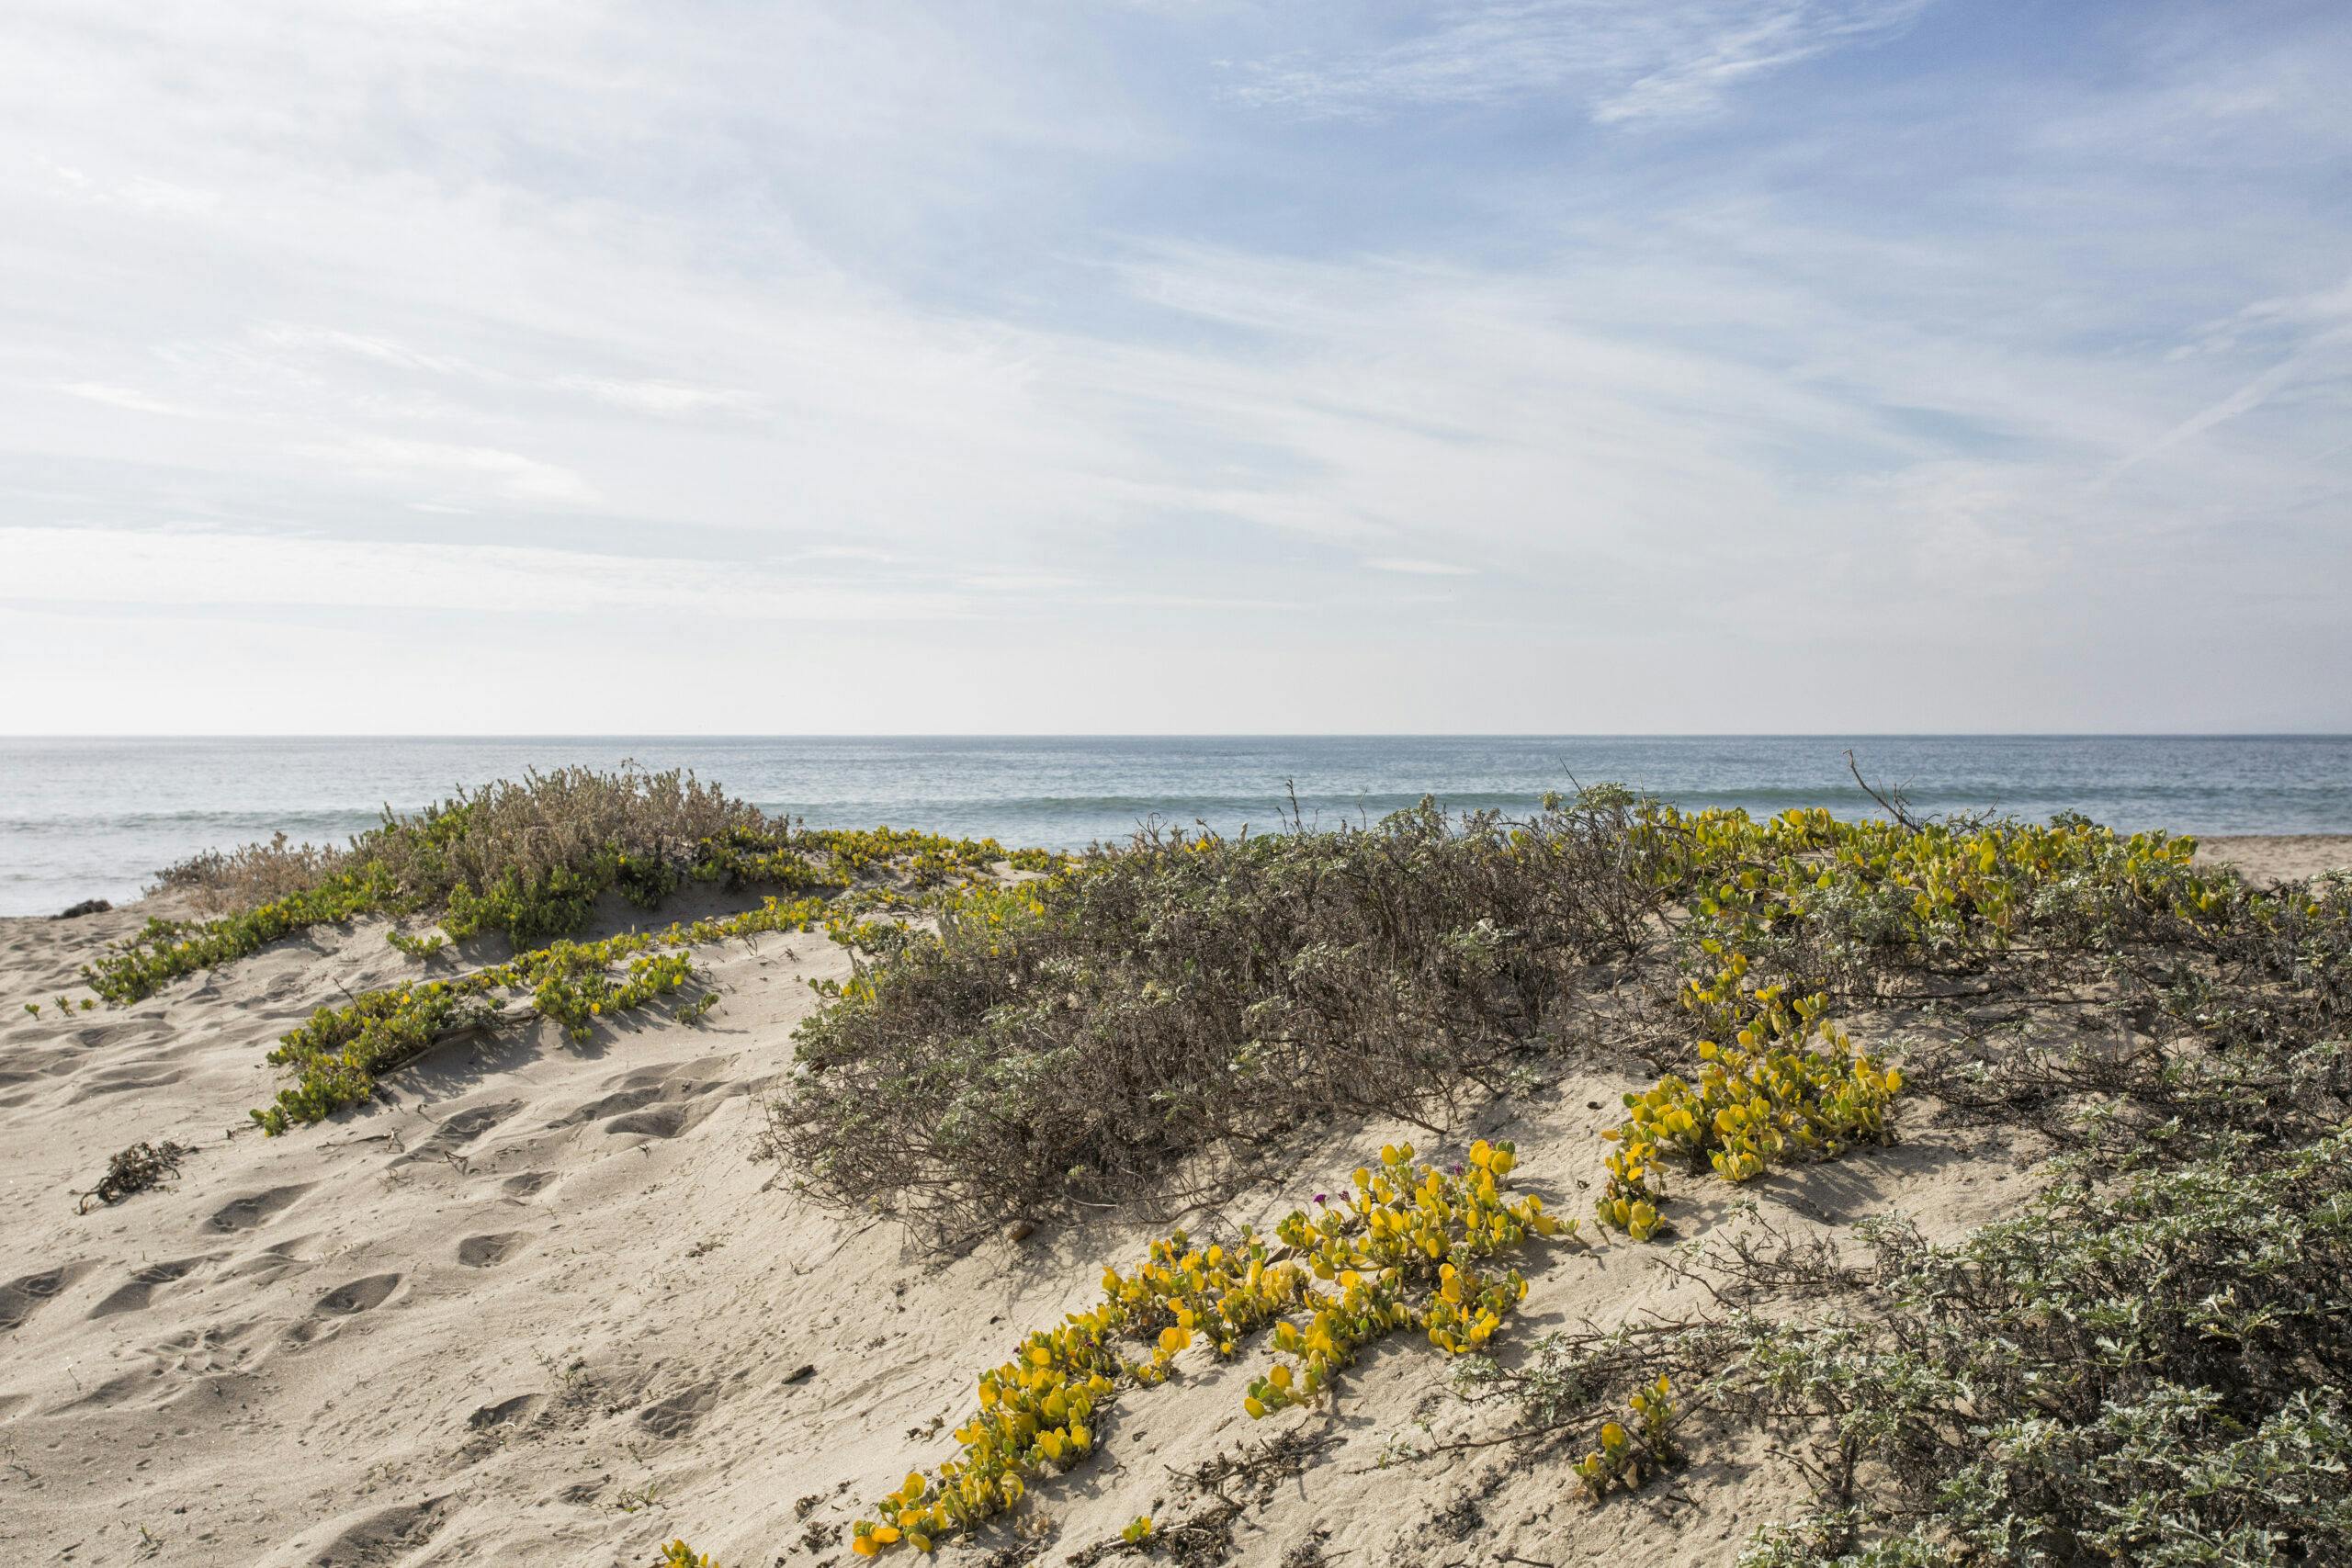 Beach dunes with Pacific Ocean in background